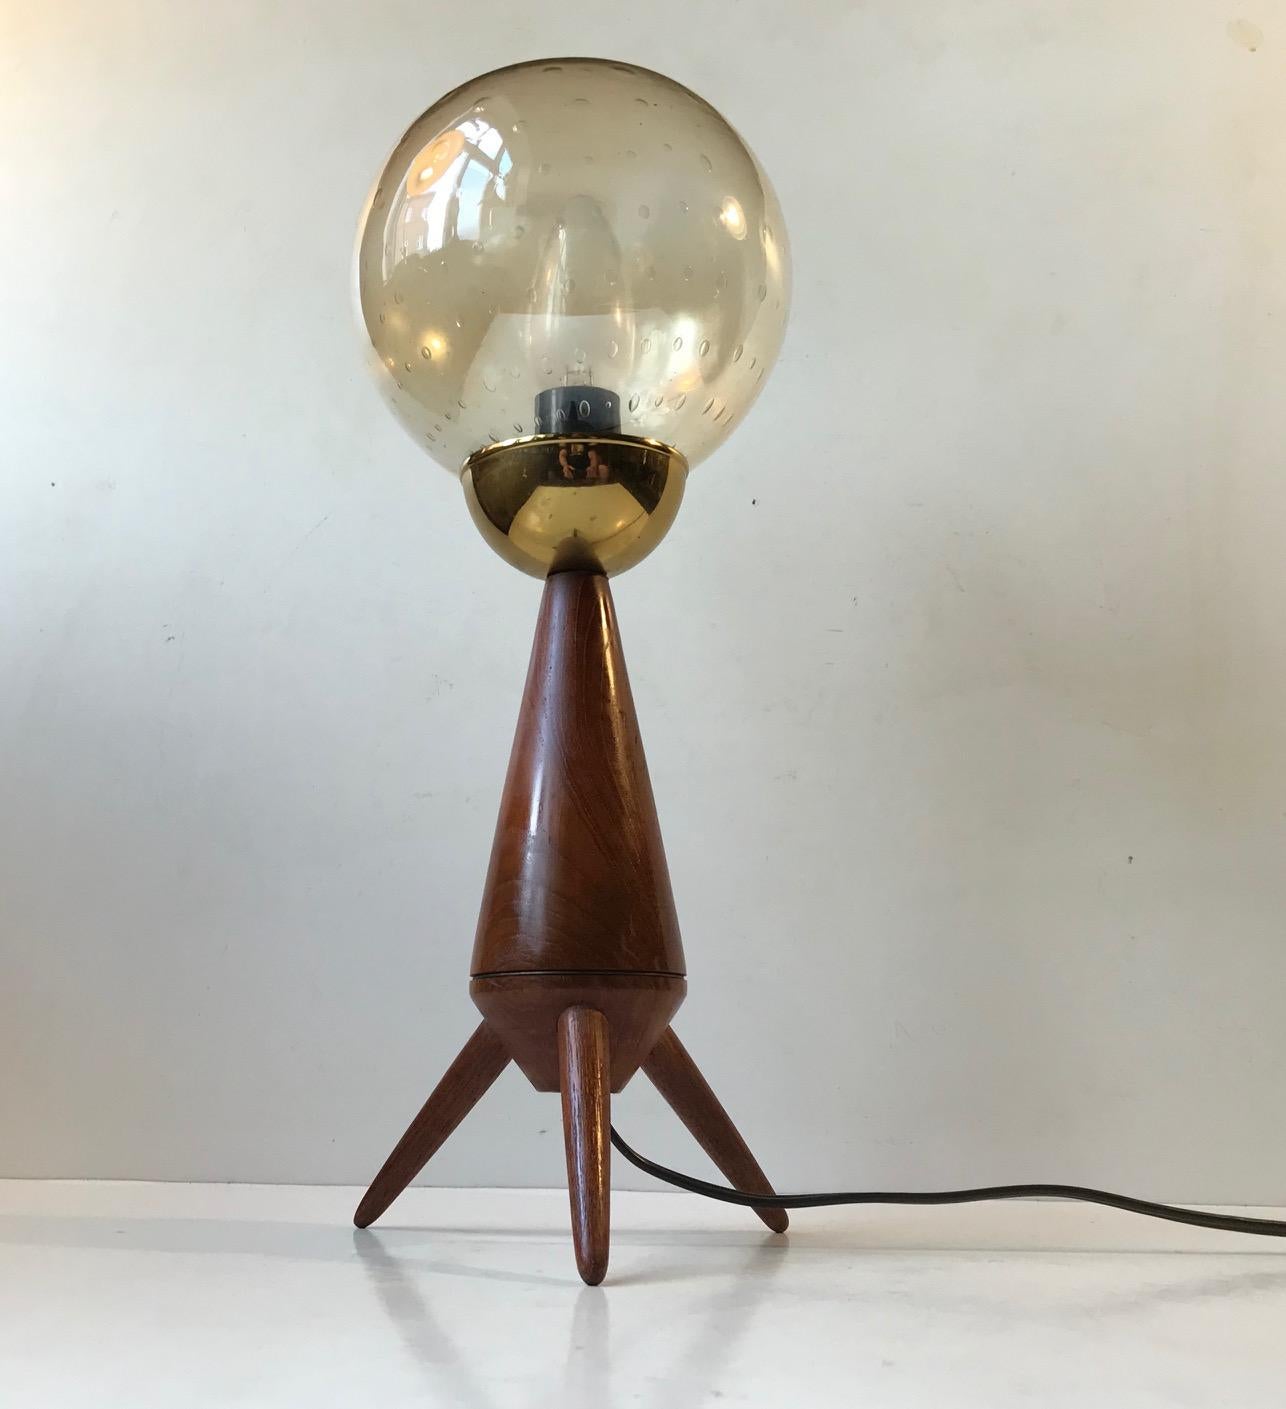 Scandinavian Midcentury Tripod Table Lamp in Teak and Glass, 1960s For Sale 2